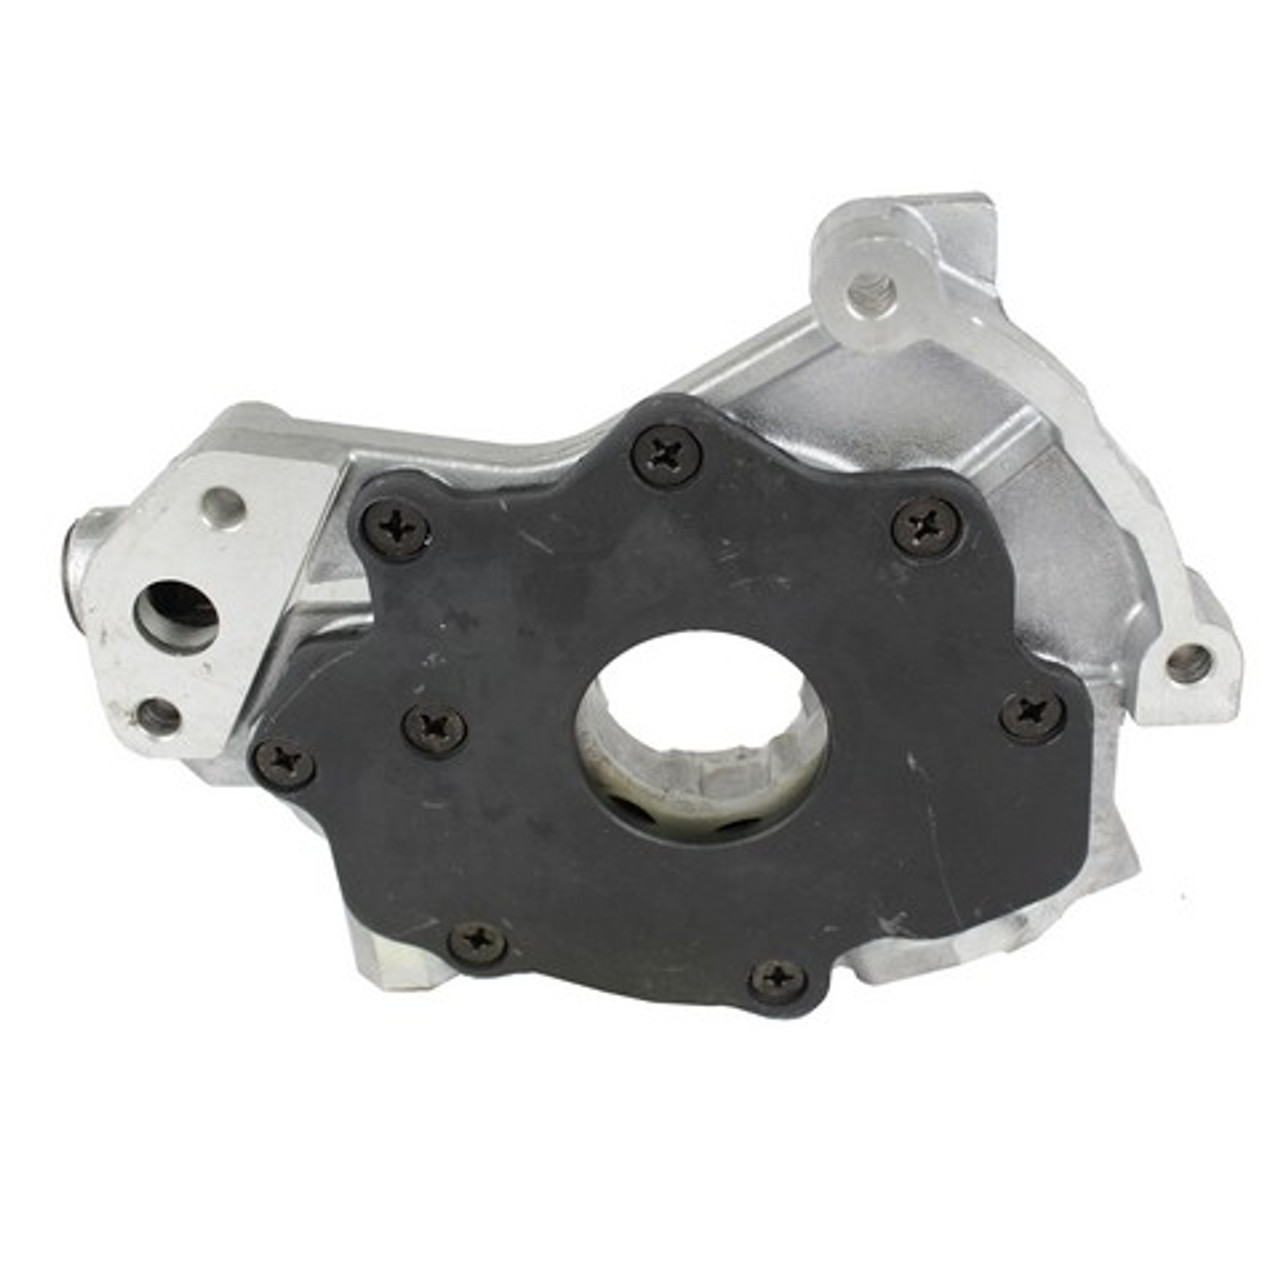 Oil Pump 5.4L 2010 Ford Expedition - OP4179.6